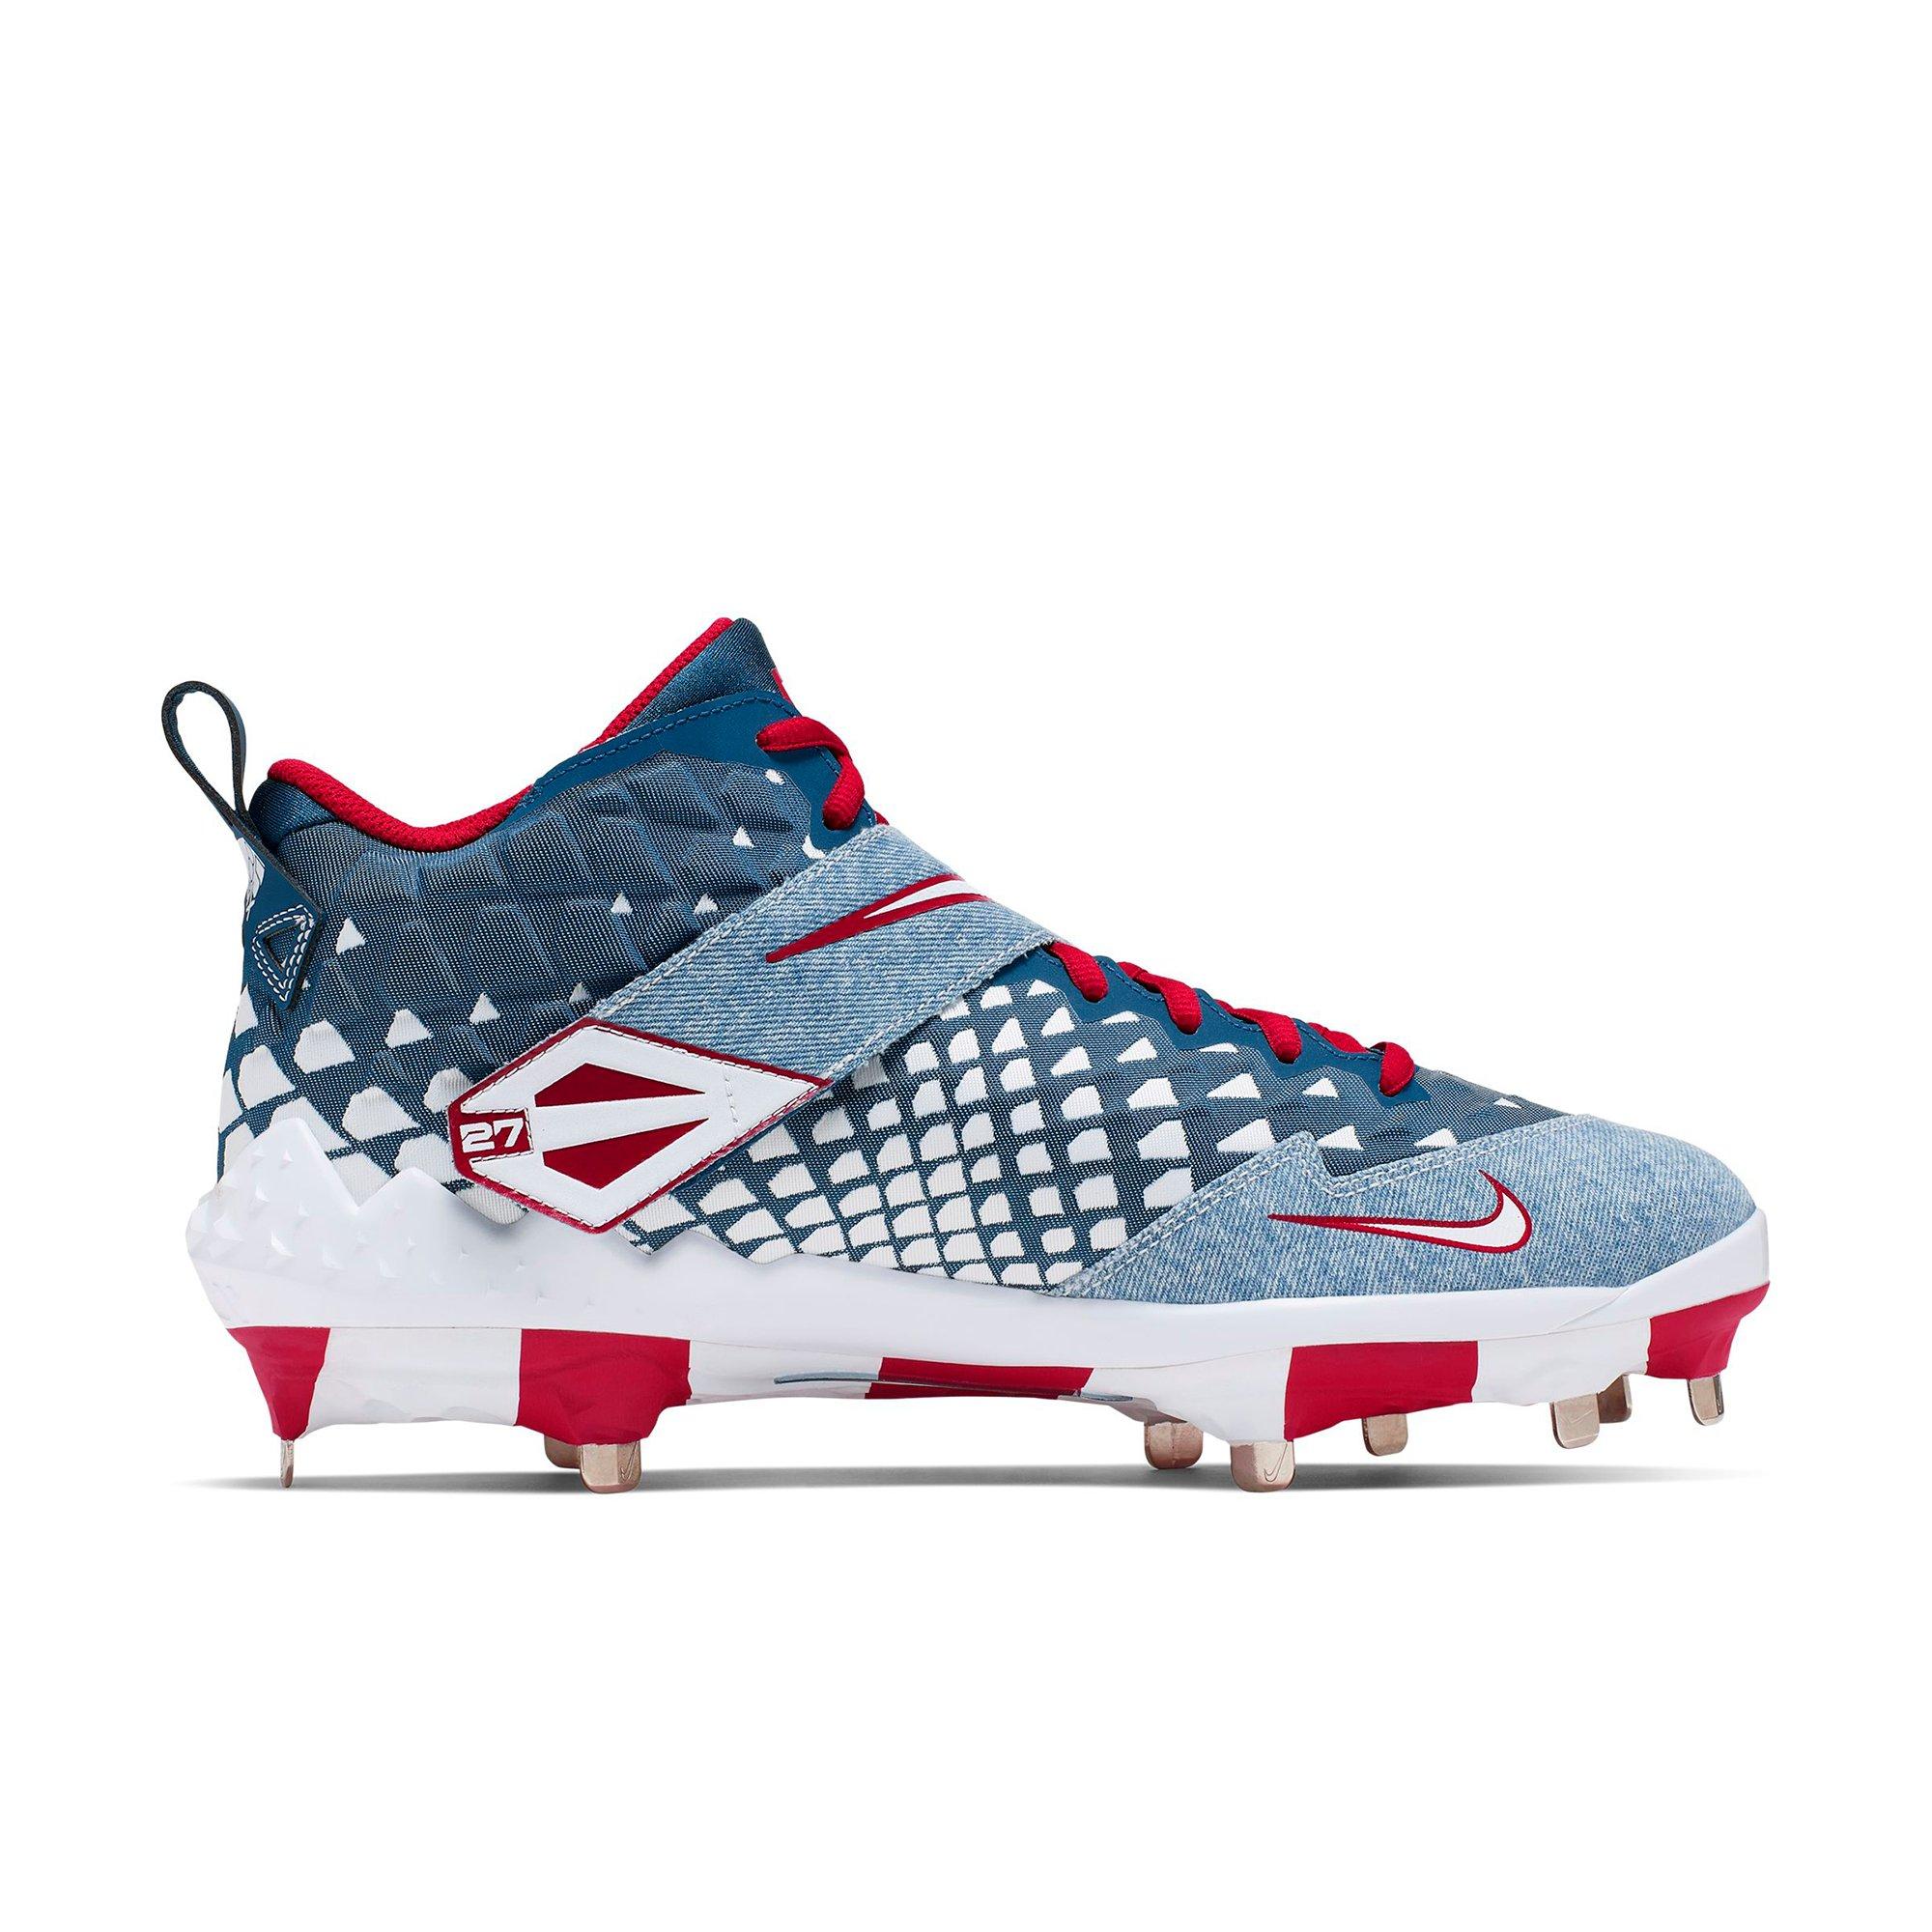 trout youth baseball cleats